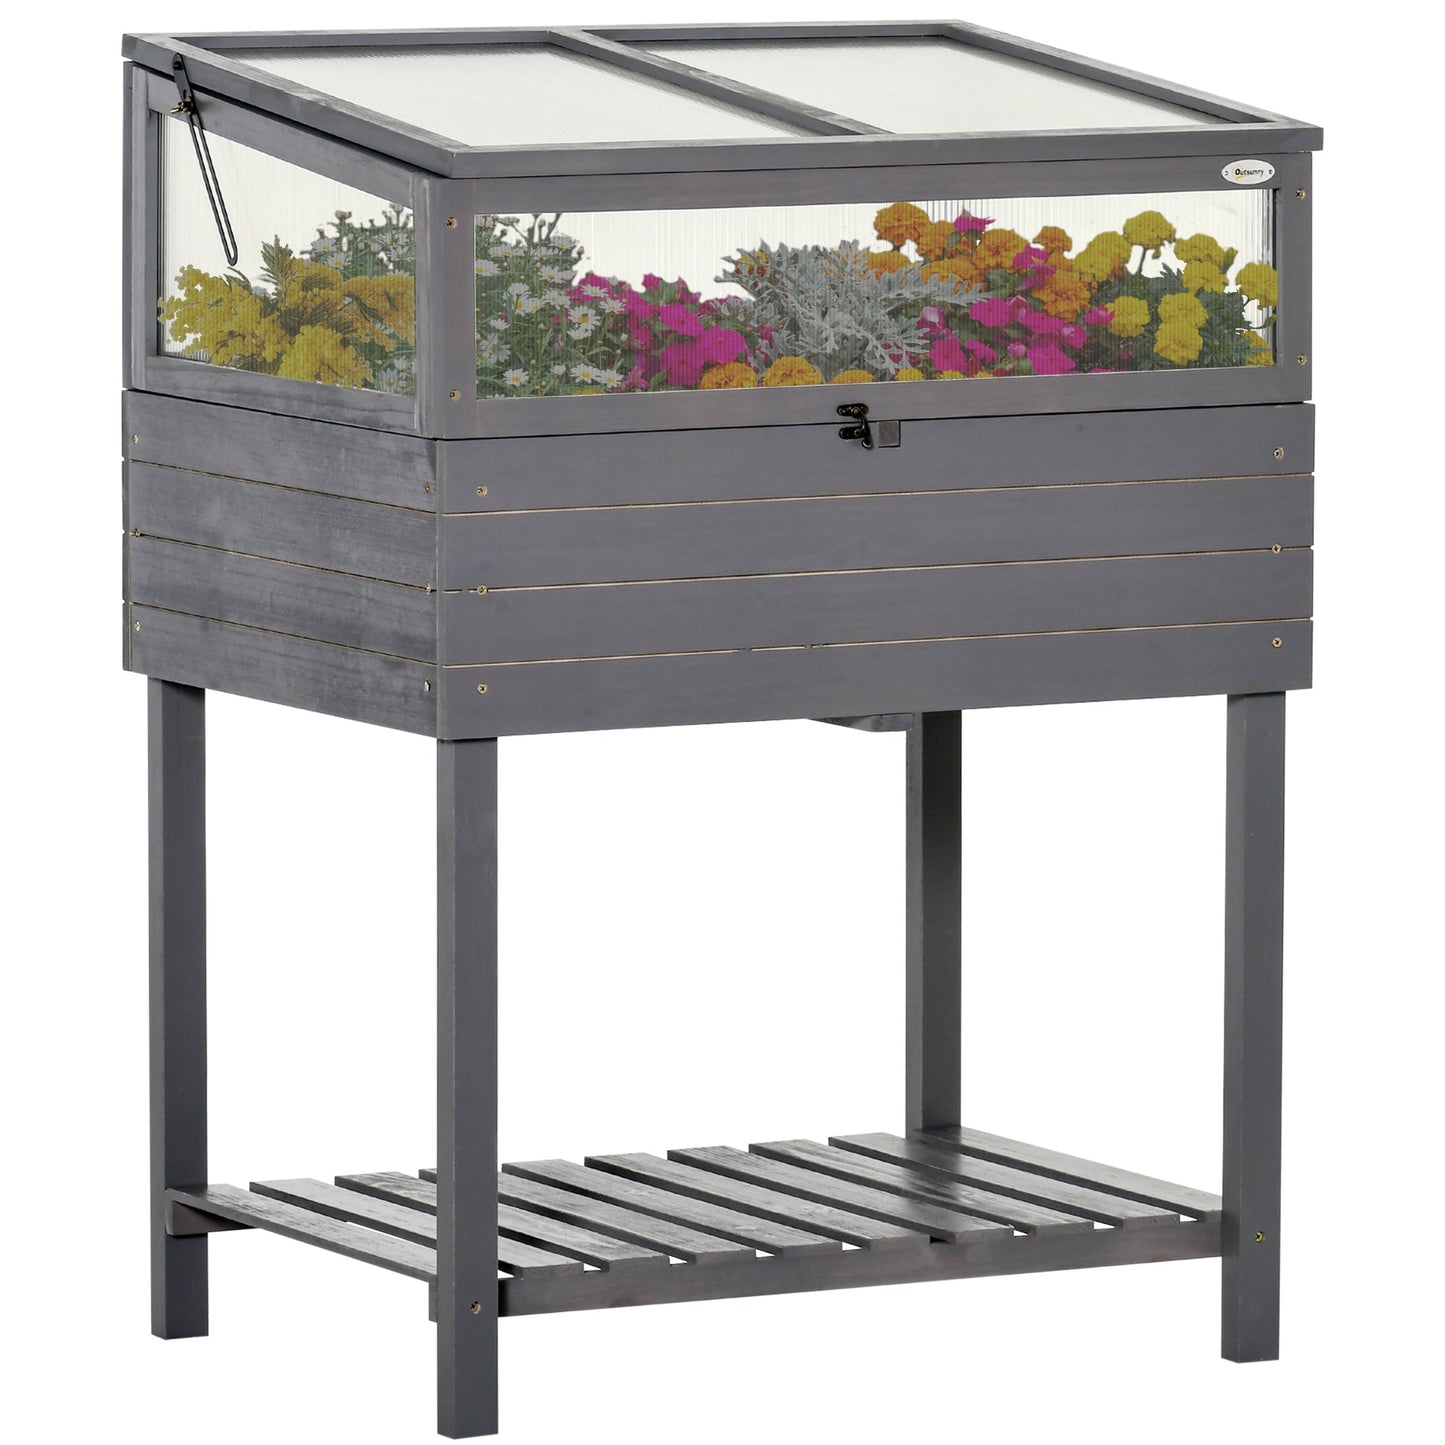 Raised Garden Bed with Cold Frame Greenhouse, Grow Grids and Storage Shelf, Outdoor 2 Tiers Elevated Wood Planter Box for Herbs and Vegetables, Use for Patio, Backyard, Balcony at Gallery Canada